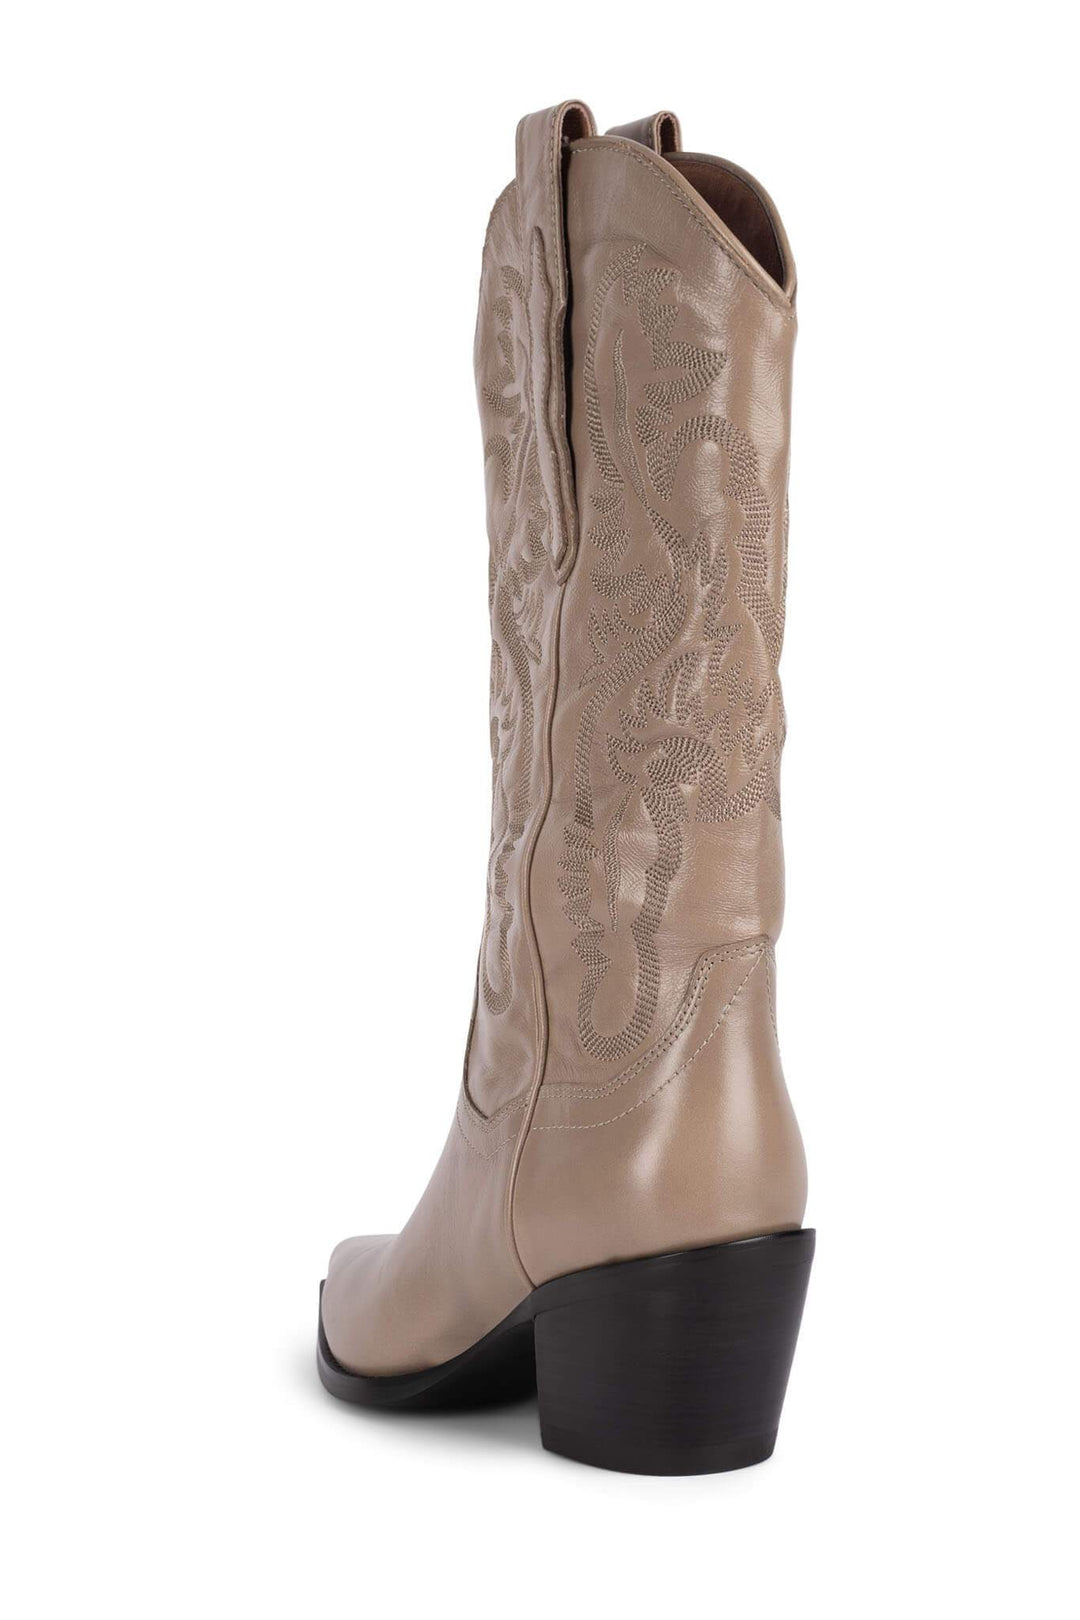 Jeffrey Campbell - Dagget Western Boots in Taupe